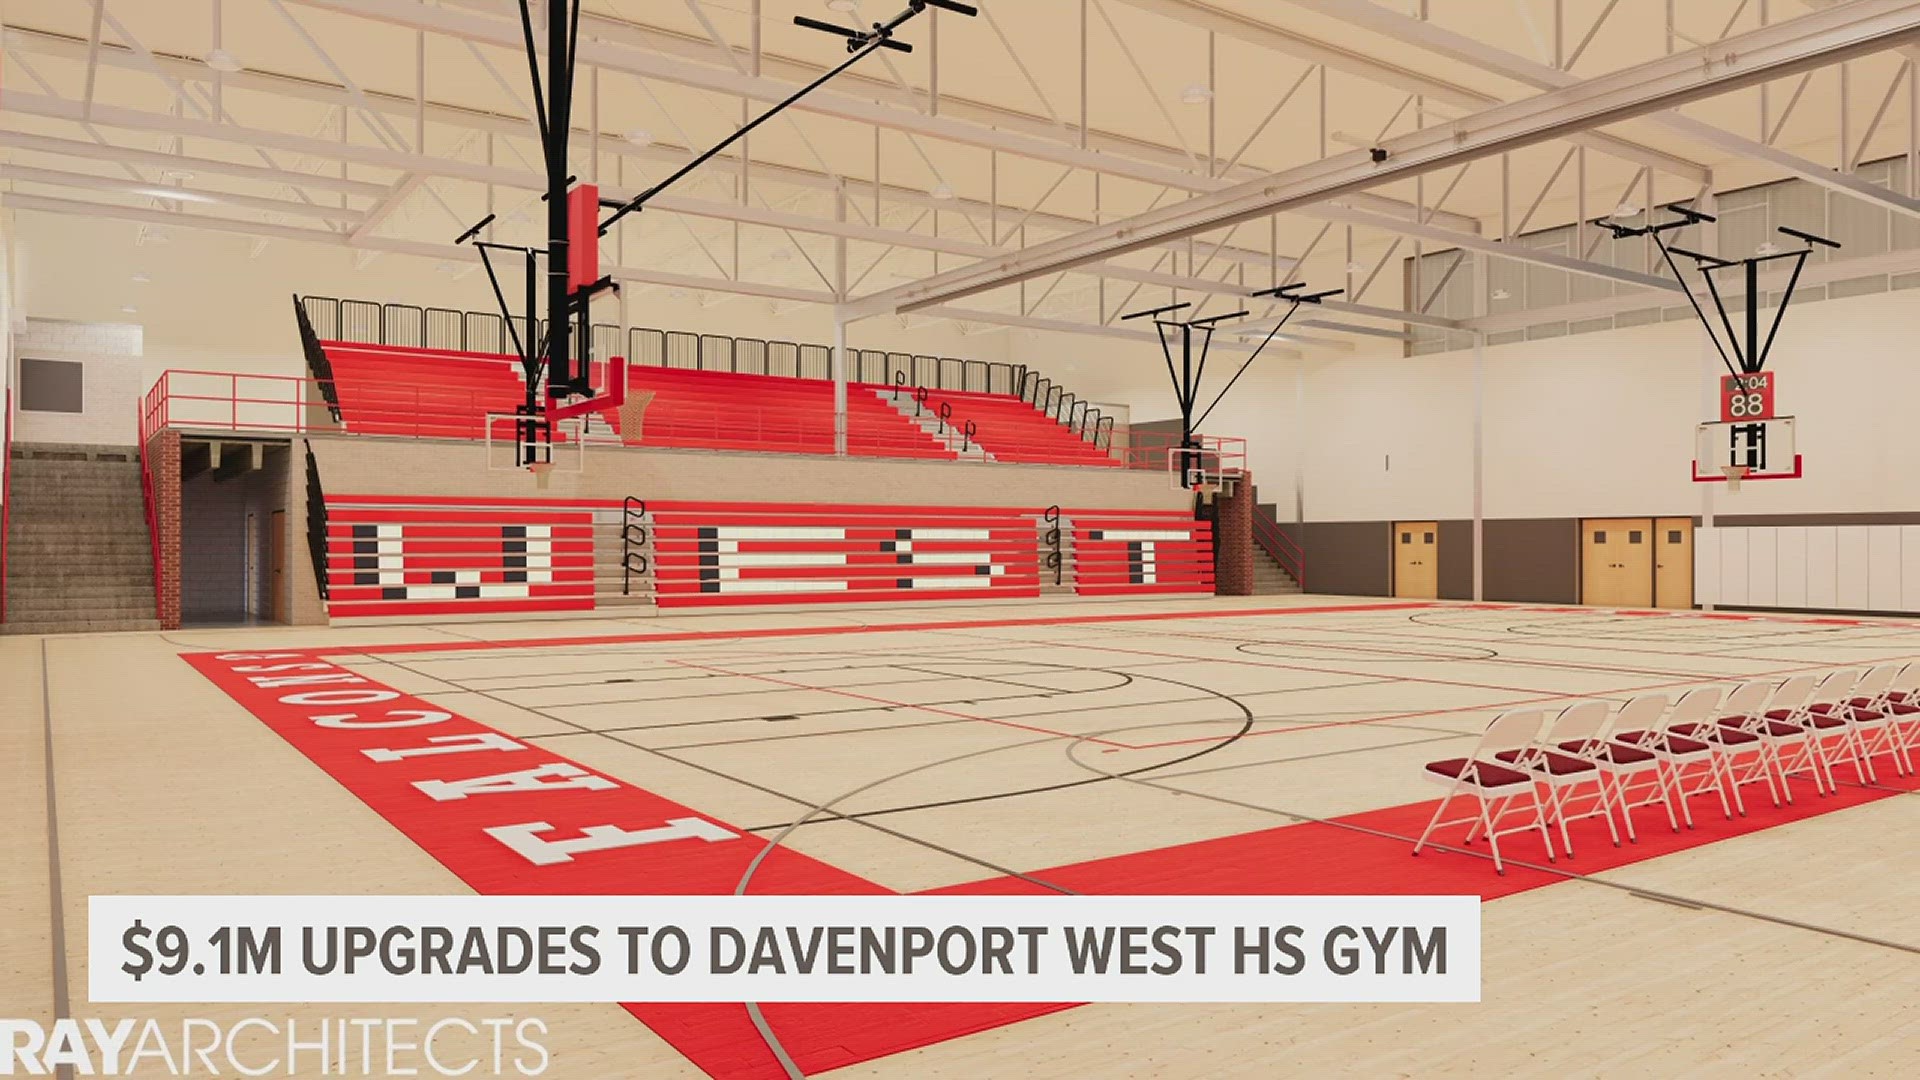 The improvements will bring new weight, fitness and wrestling rooms; new basketball and volleyball courts; and a new gym with seats for 500 spectators.